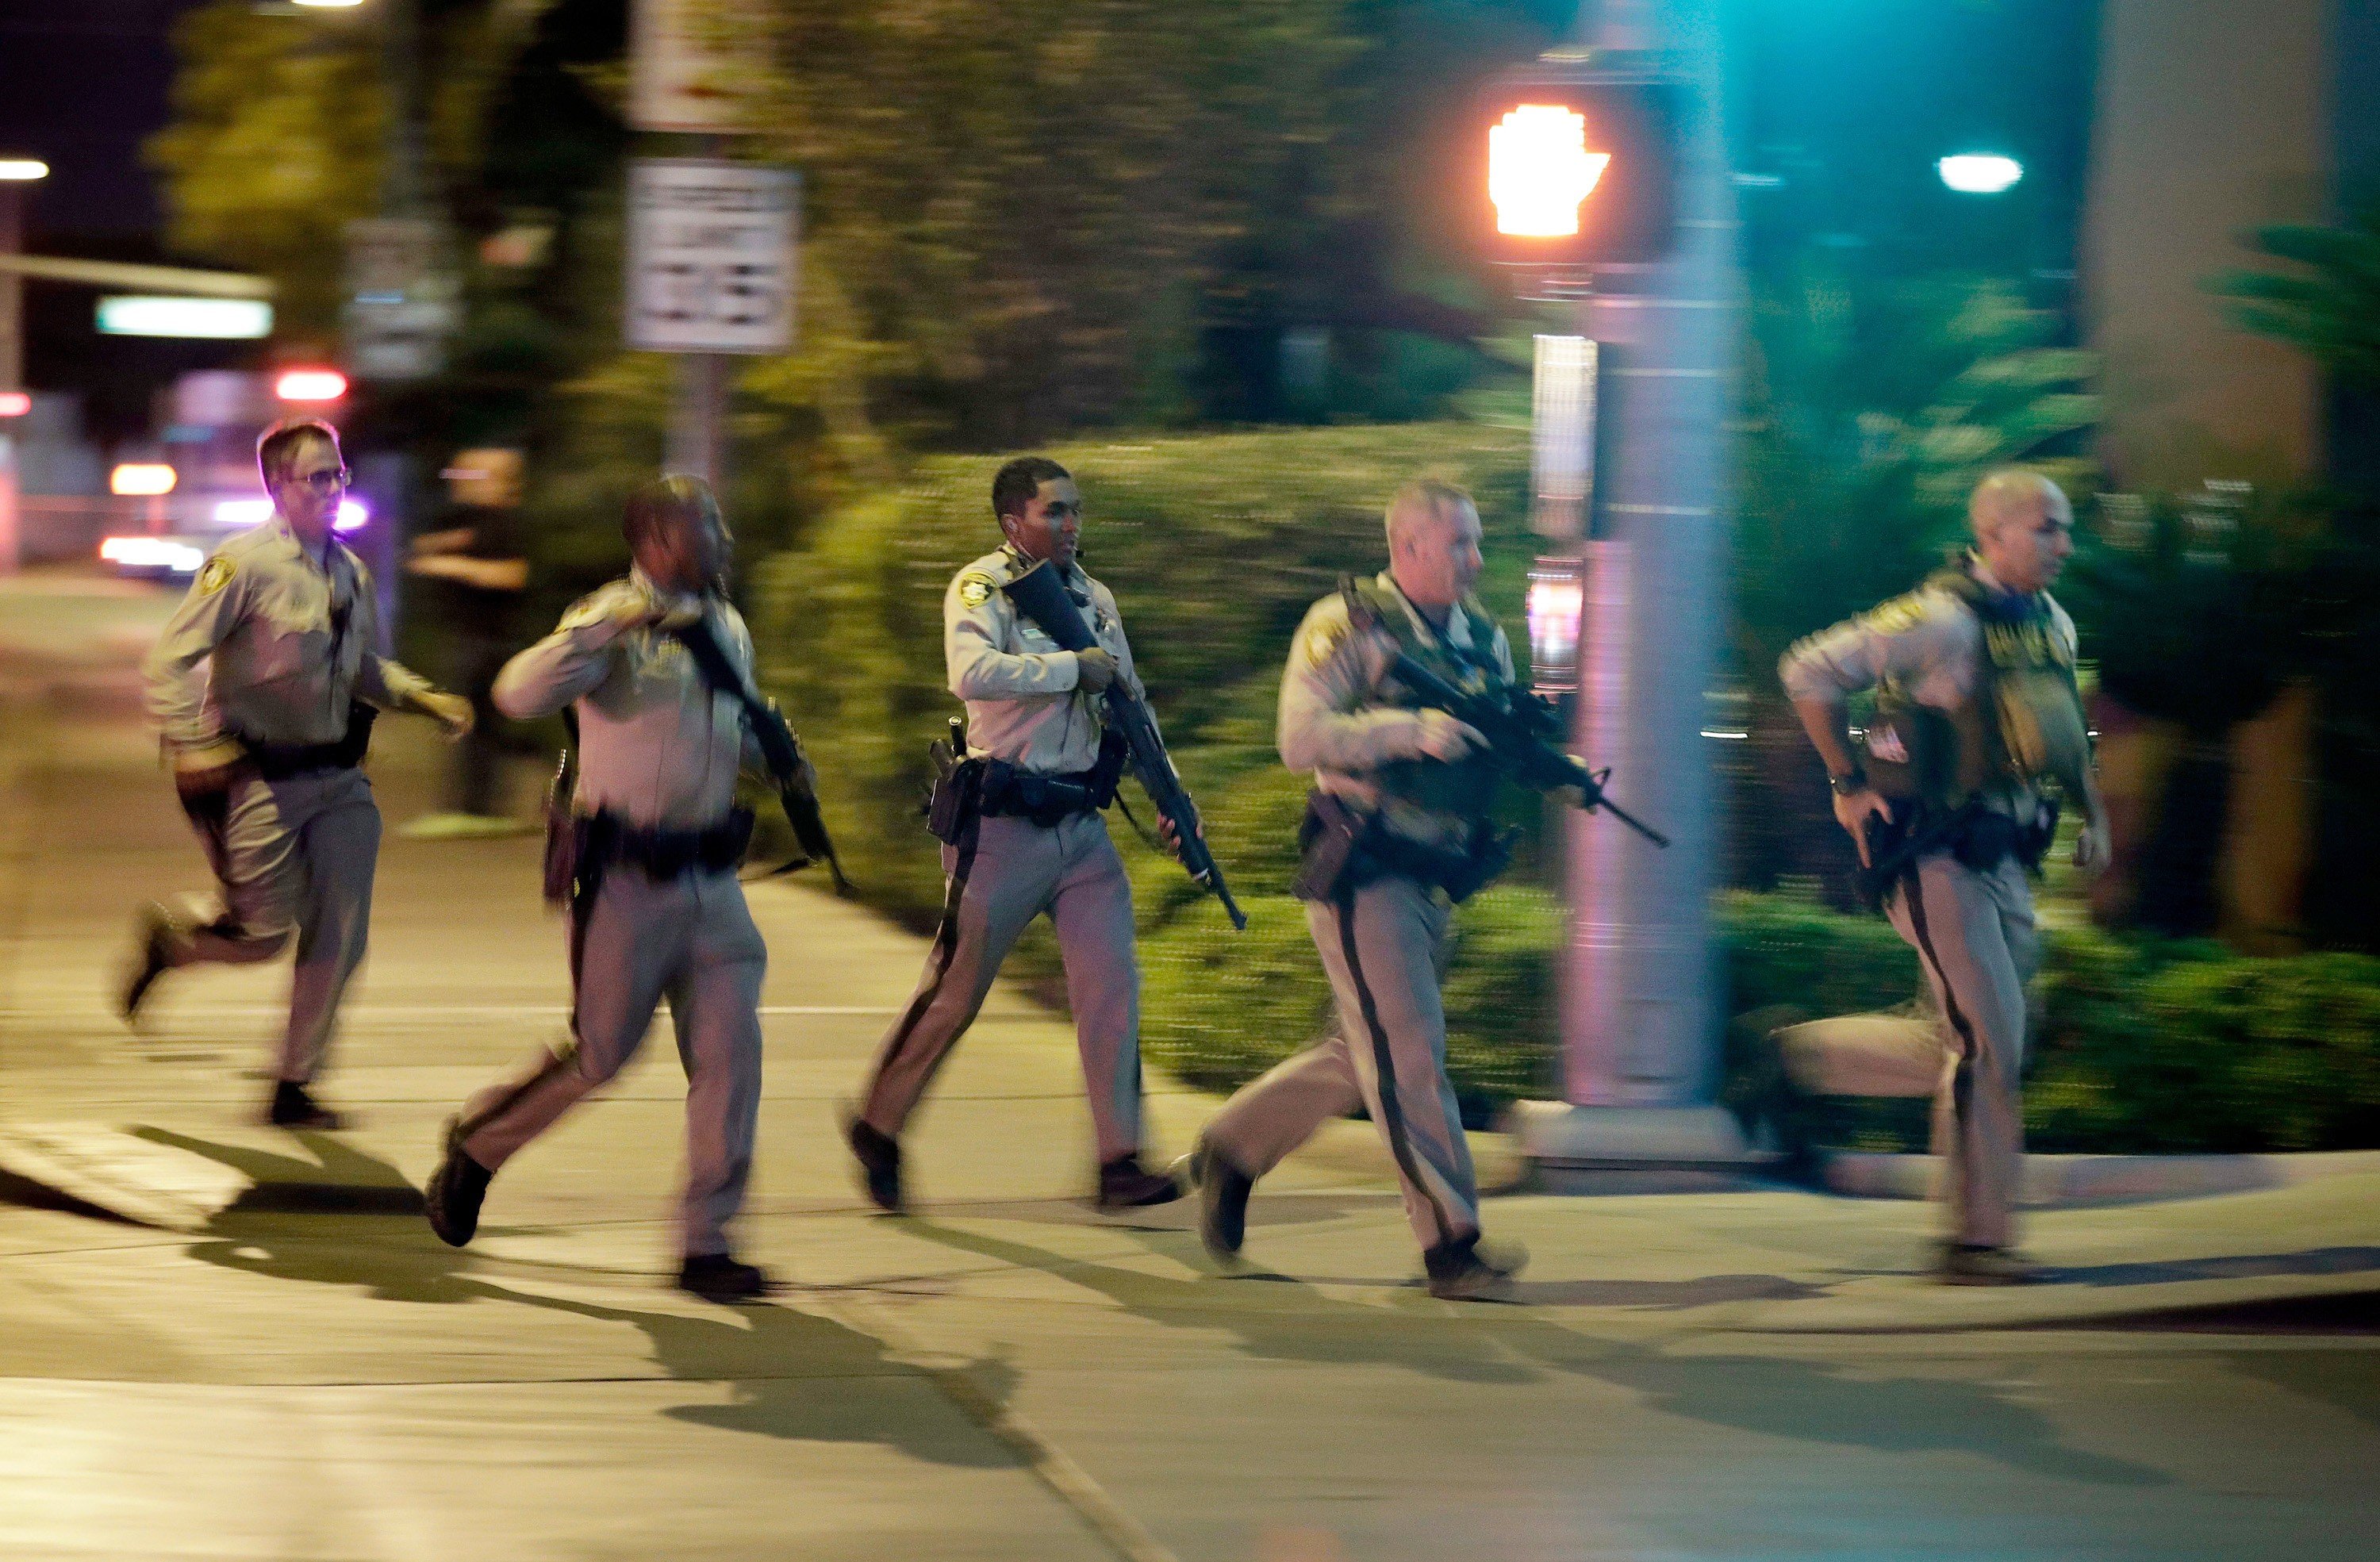 Police run toward the scene of a shooting near the Mandalay Bay resort and casino on the Las Vegas Strip in Las Vegas on October 1, 2017. Photo: AP